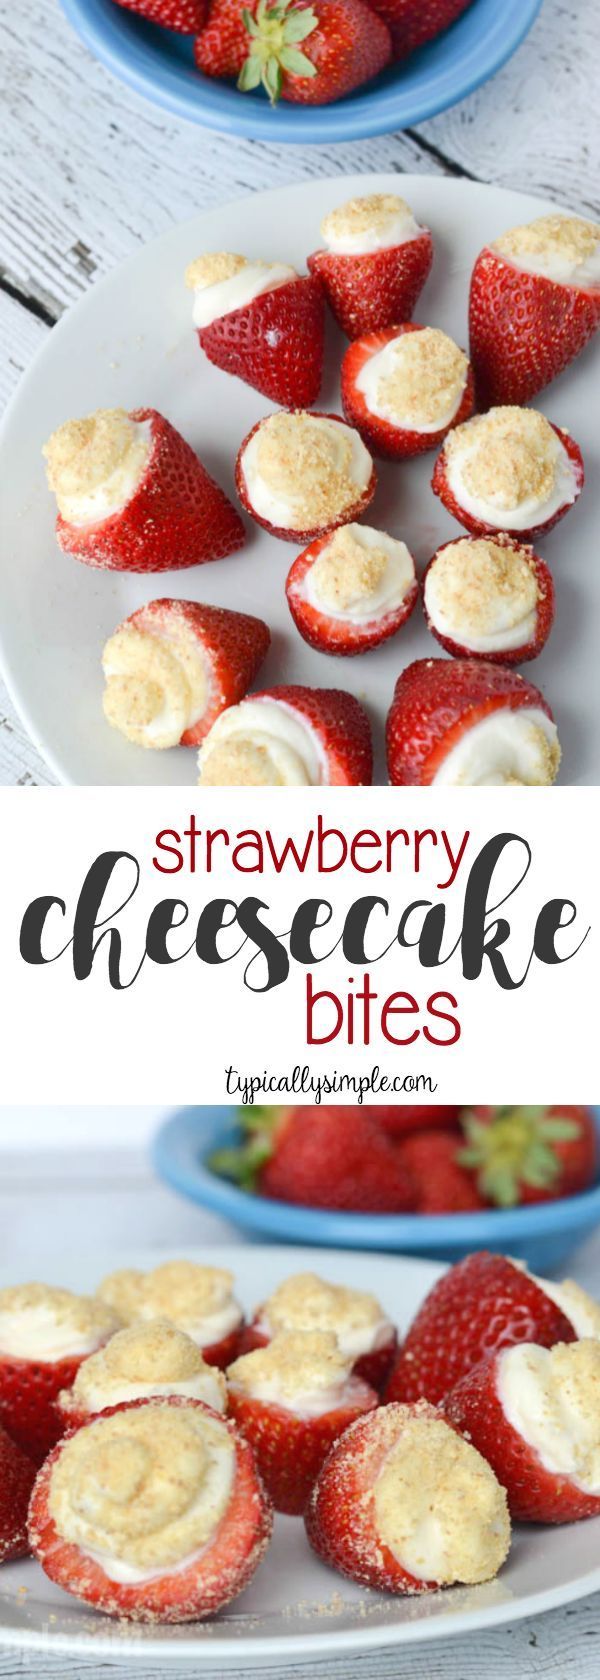 These no bake strawberry cheesecake bites are so simple to make! A great finger food dessert for parties that has the perfect